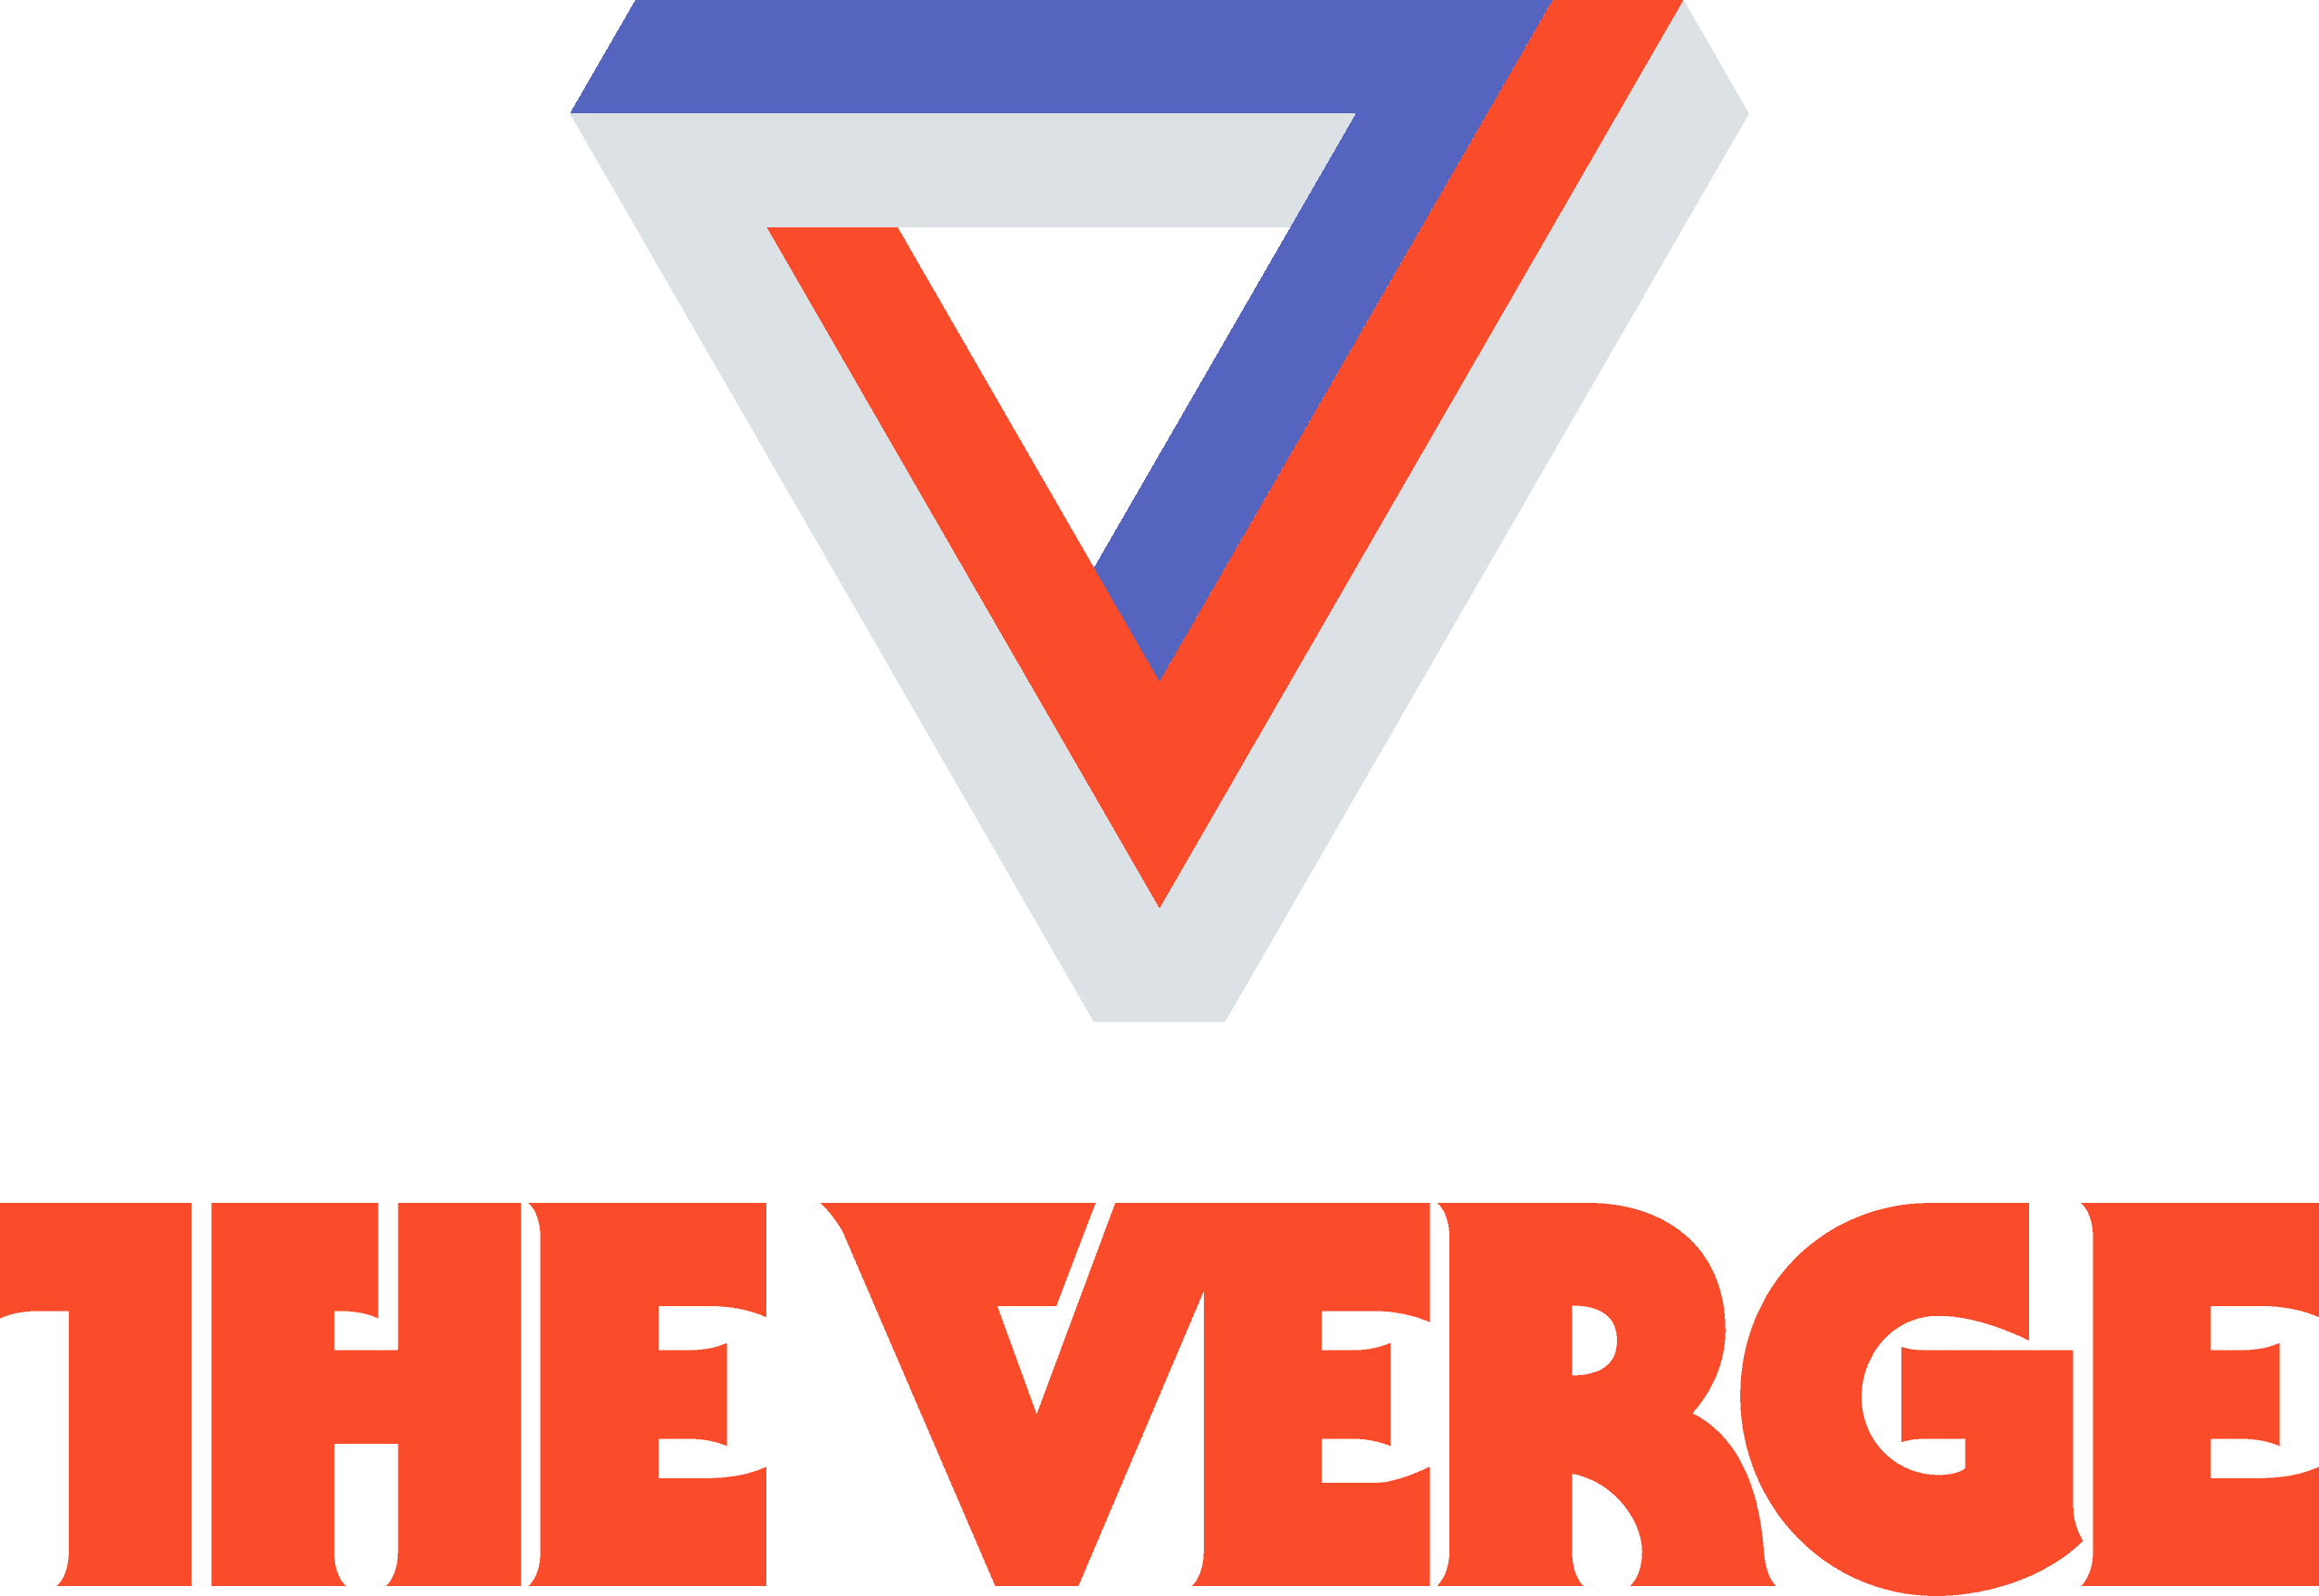 Logo for the publication The Verge